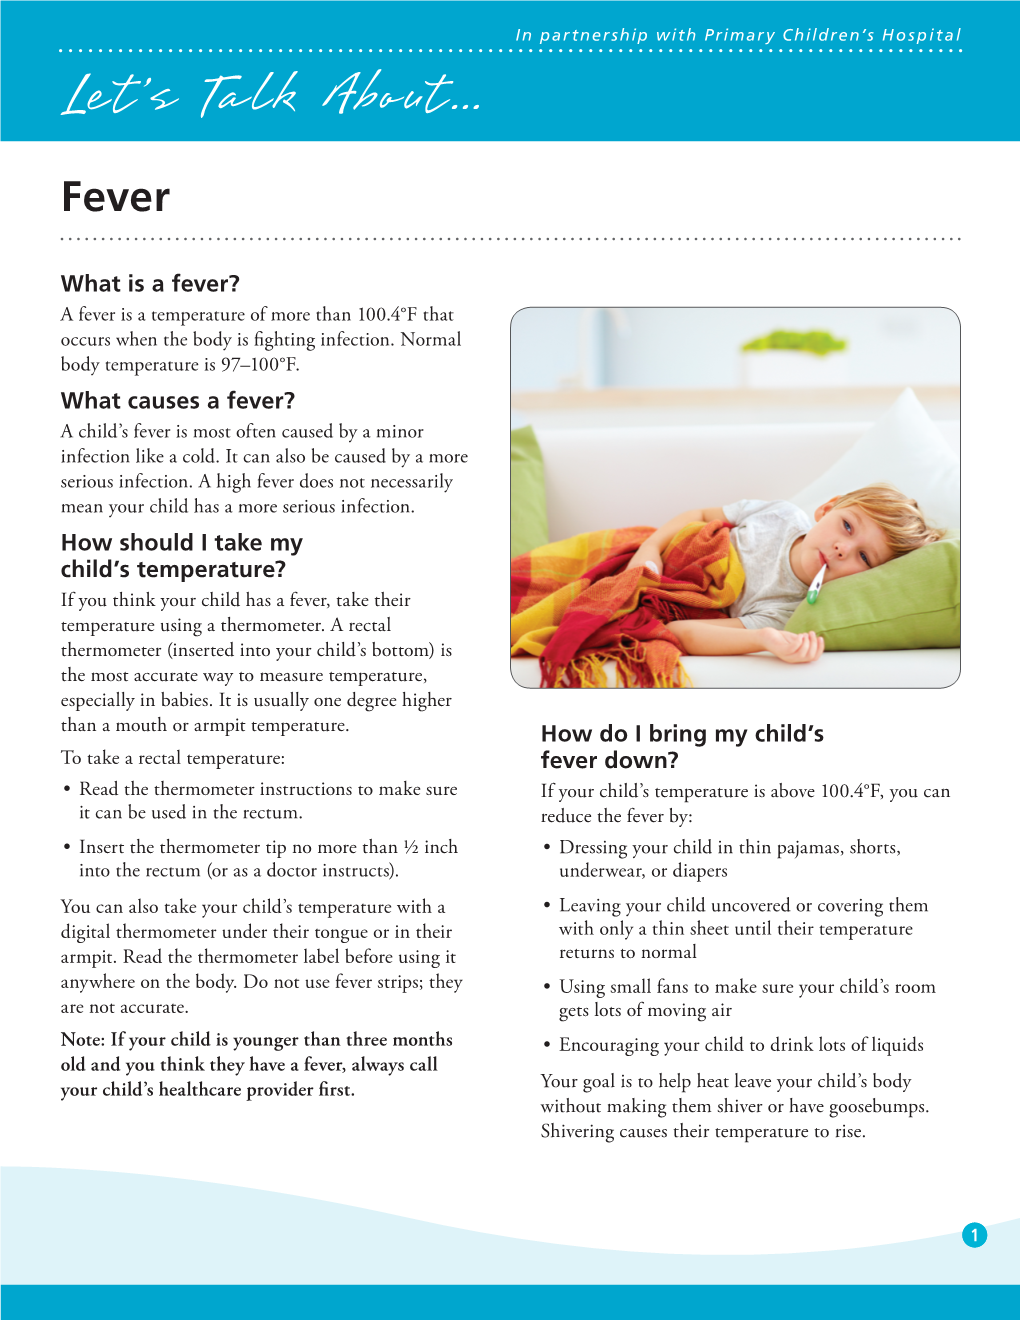 What Is a Fever? a Fever Is a Temperature of More Than 100.4°F That Occurs When the Body Is Fighting Infection